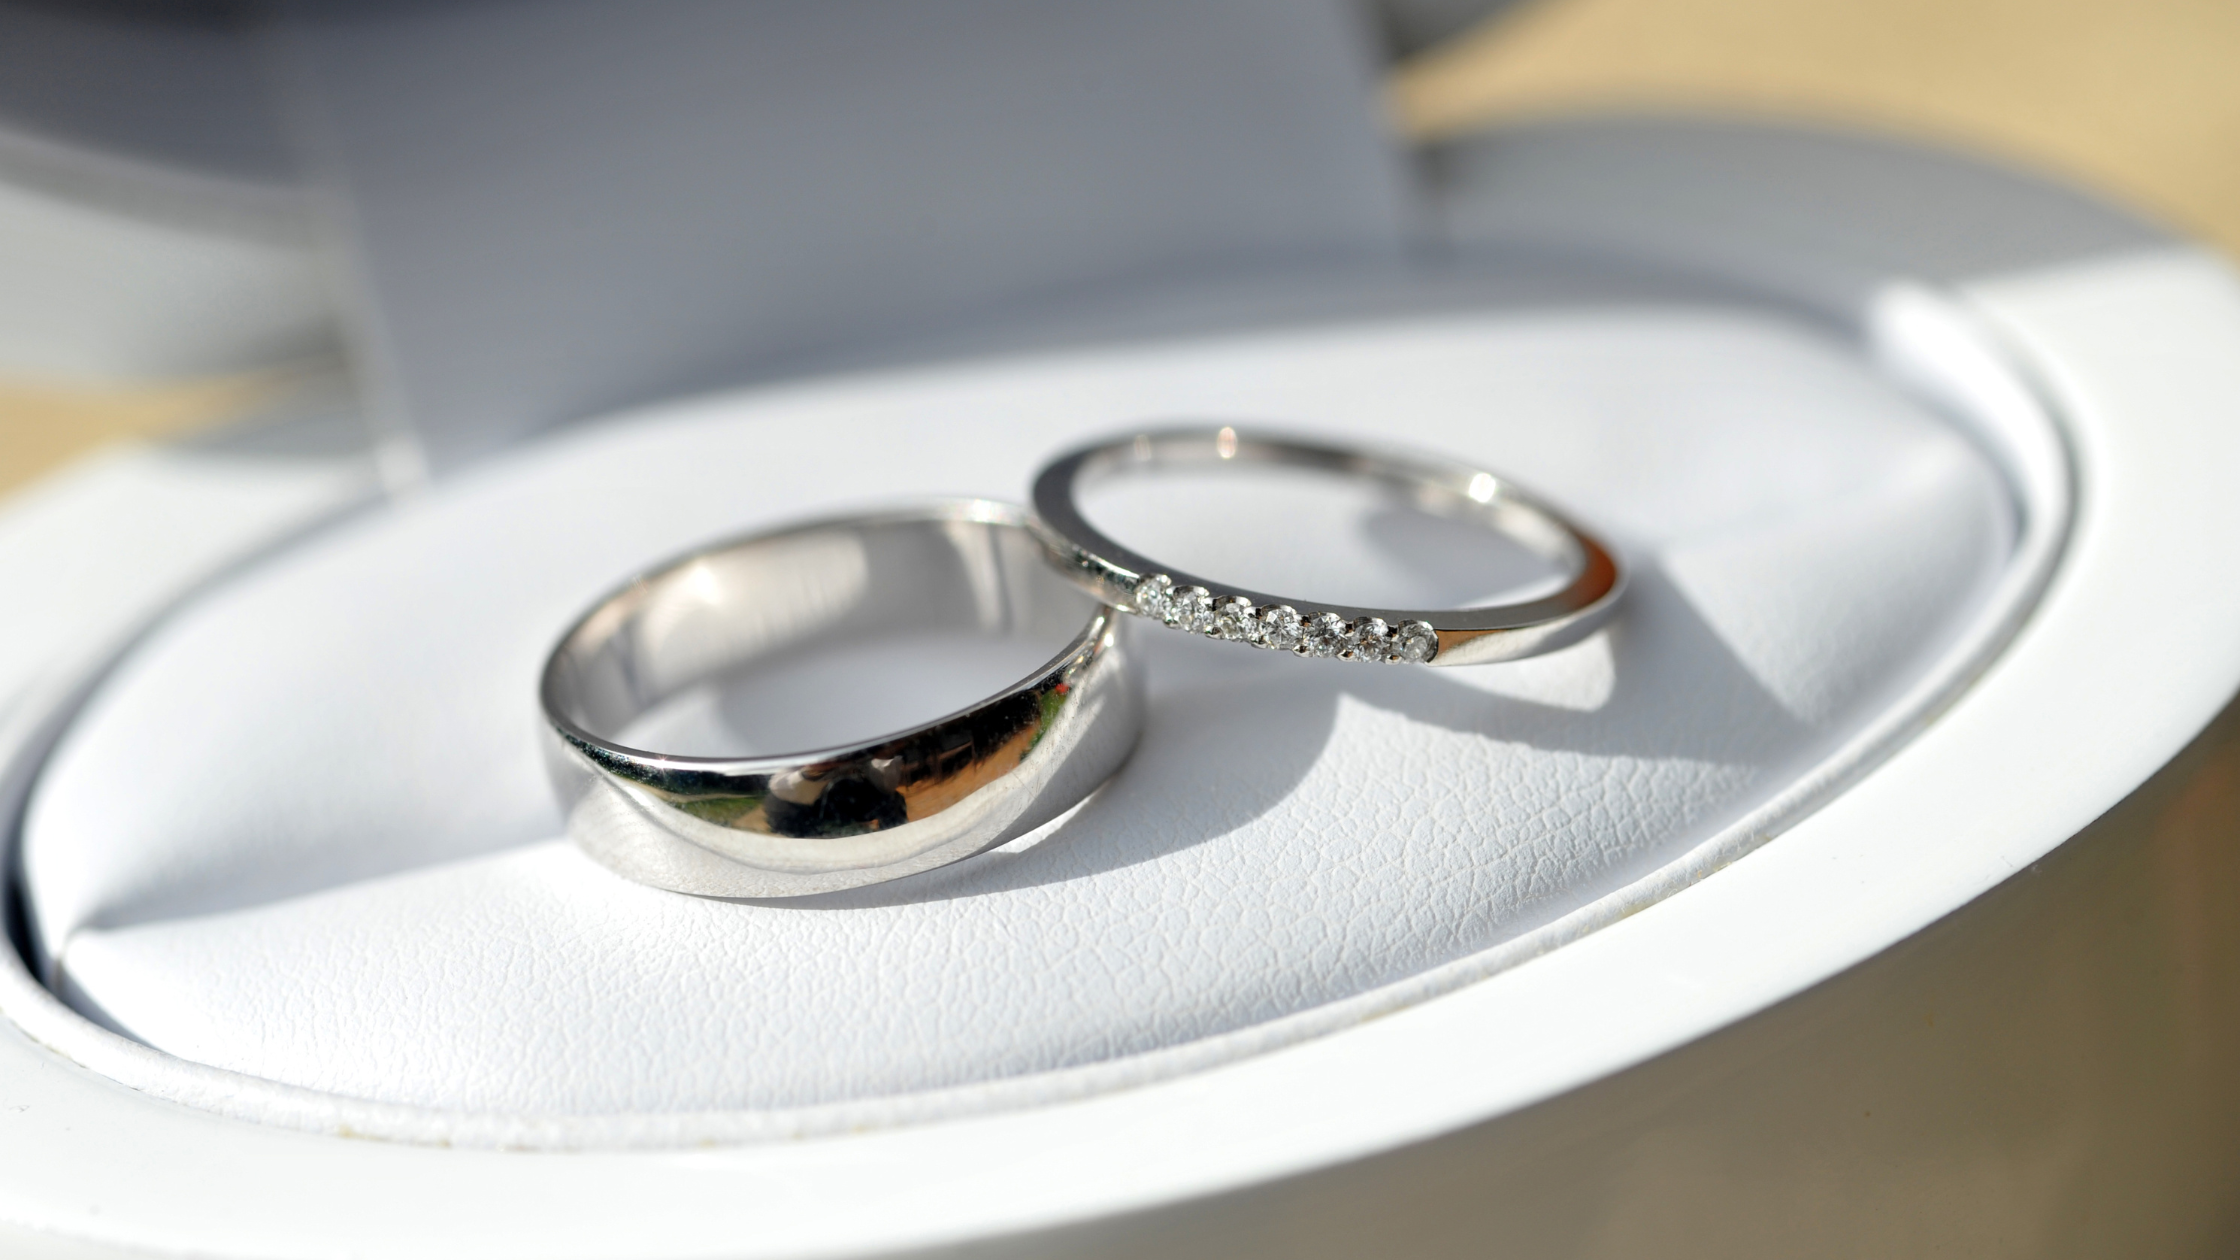 What Is The Strongest Metal For A Men's Wedding Band?